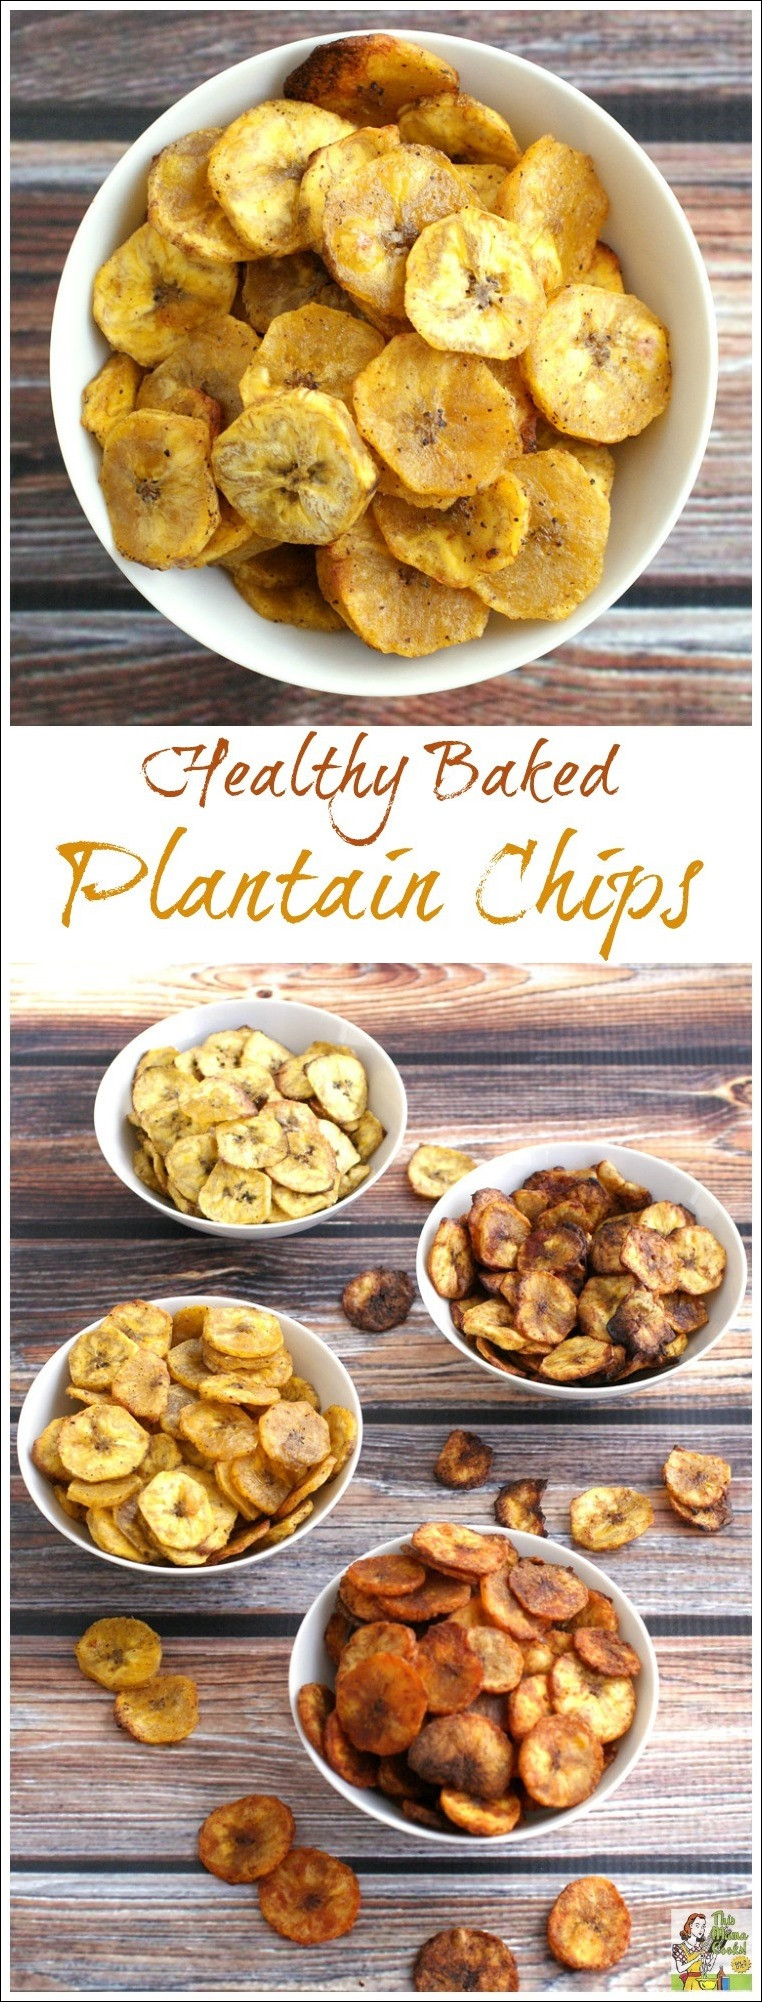 Healthy Baked Snacks
 Healthy Baked Plantain Chips Four Ways